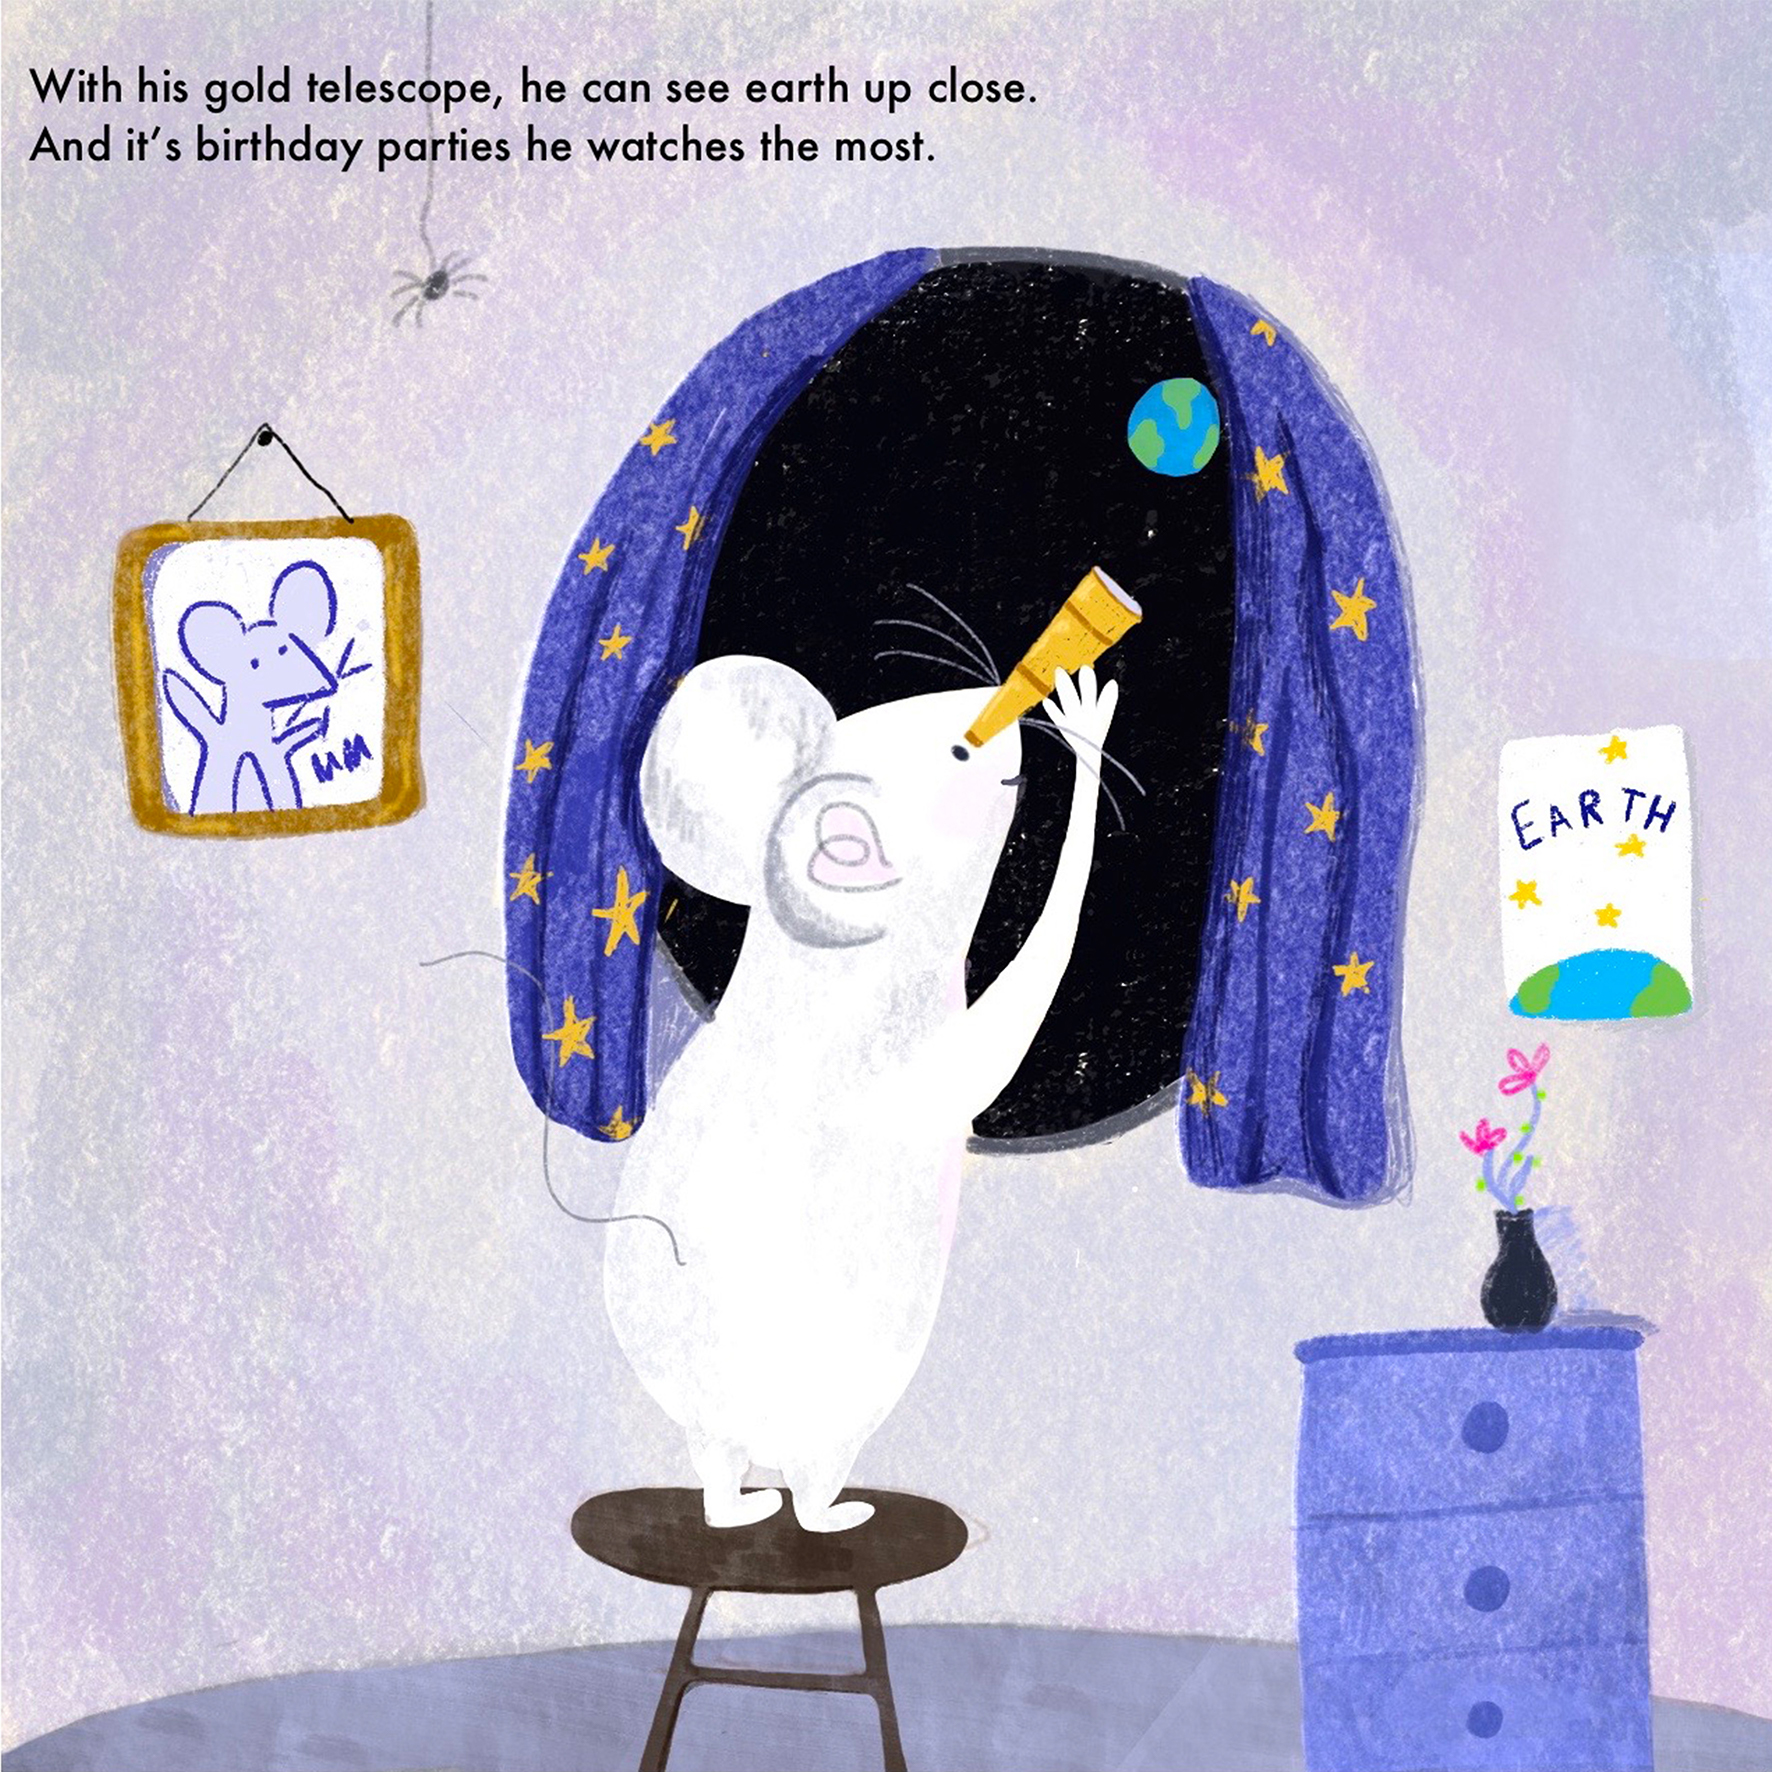 Page illustration from a children’s book about a mouse living on the moon, as part of entry for Carmelite prize.